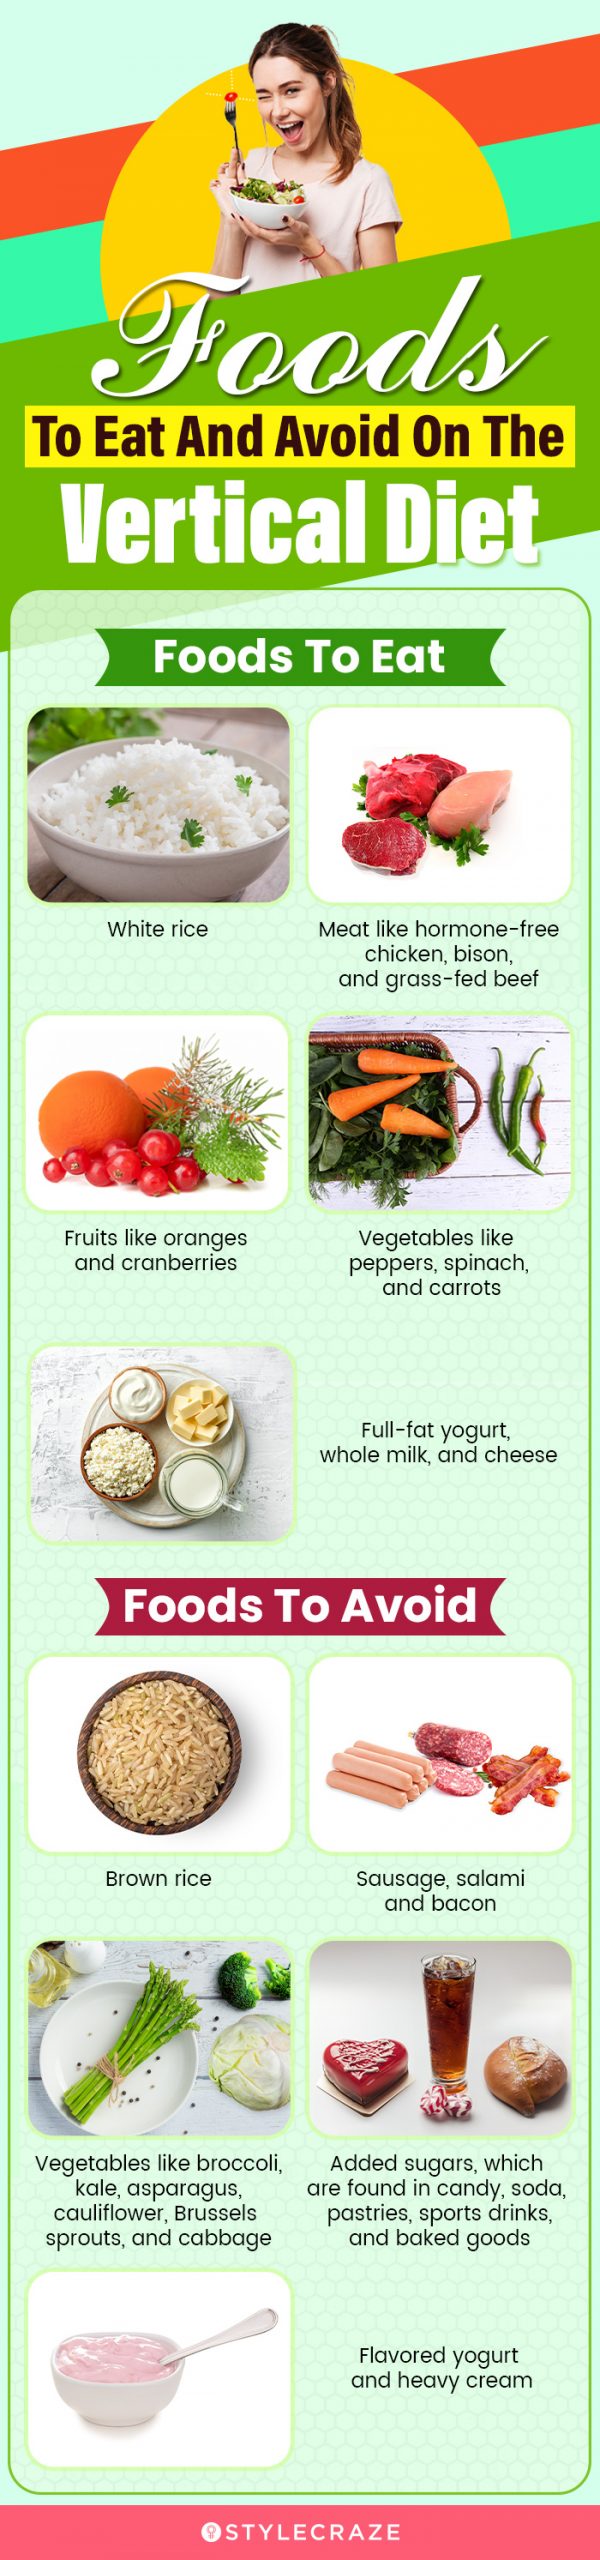 foods to eat and avoid in the vertical diet (infographic)